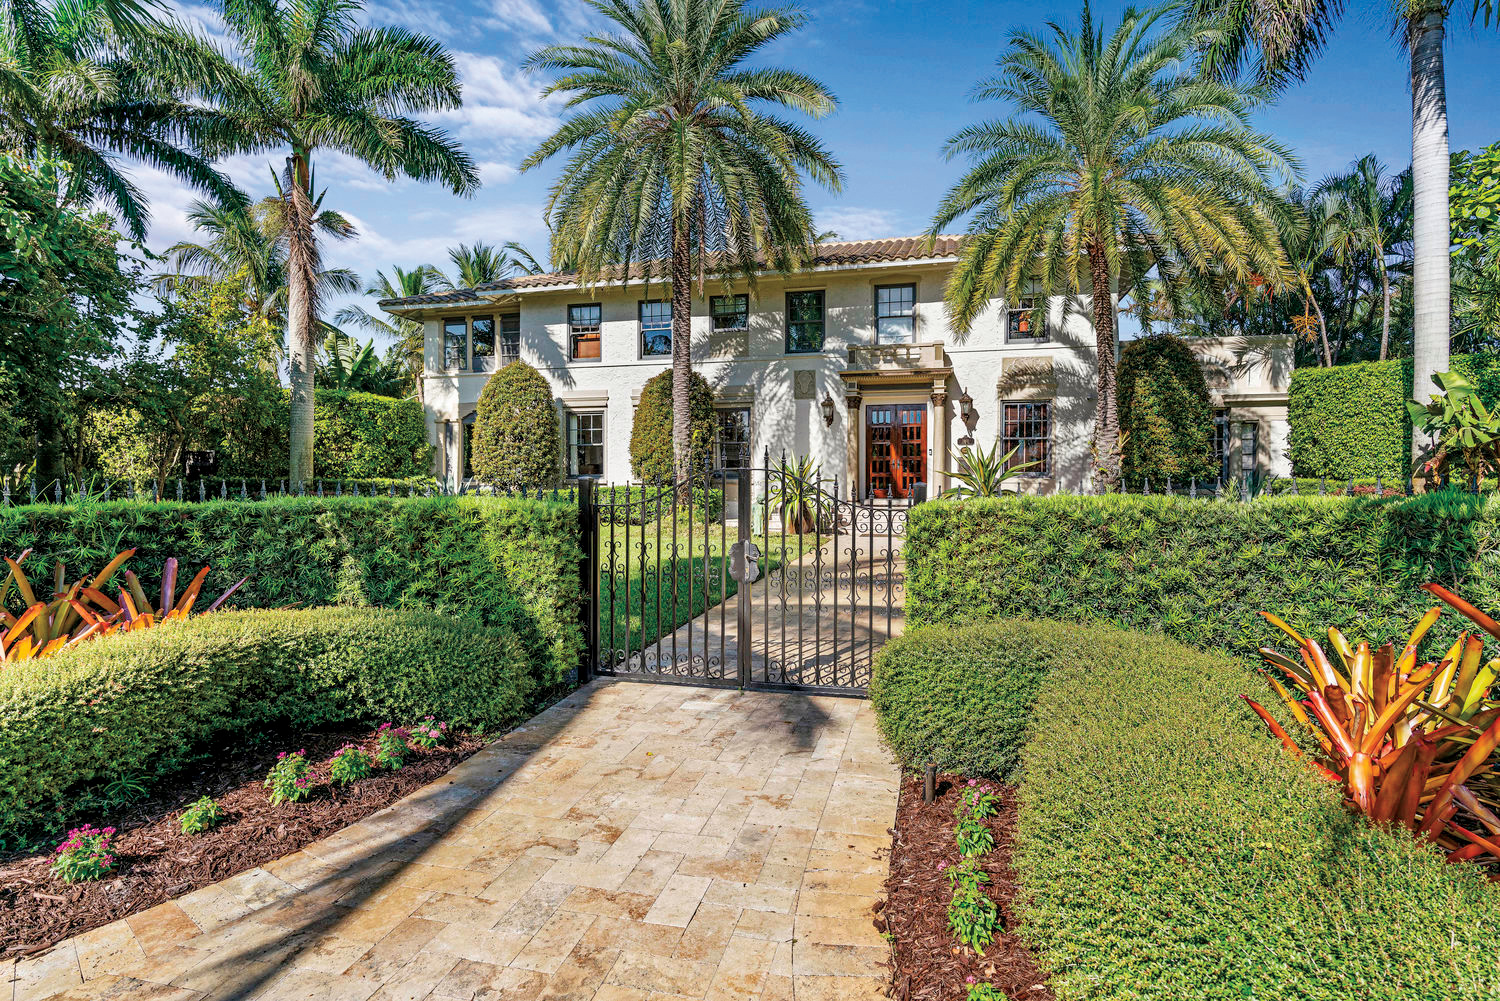 Exterior of Mediterranean Revival estate with towering palms